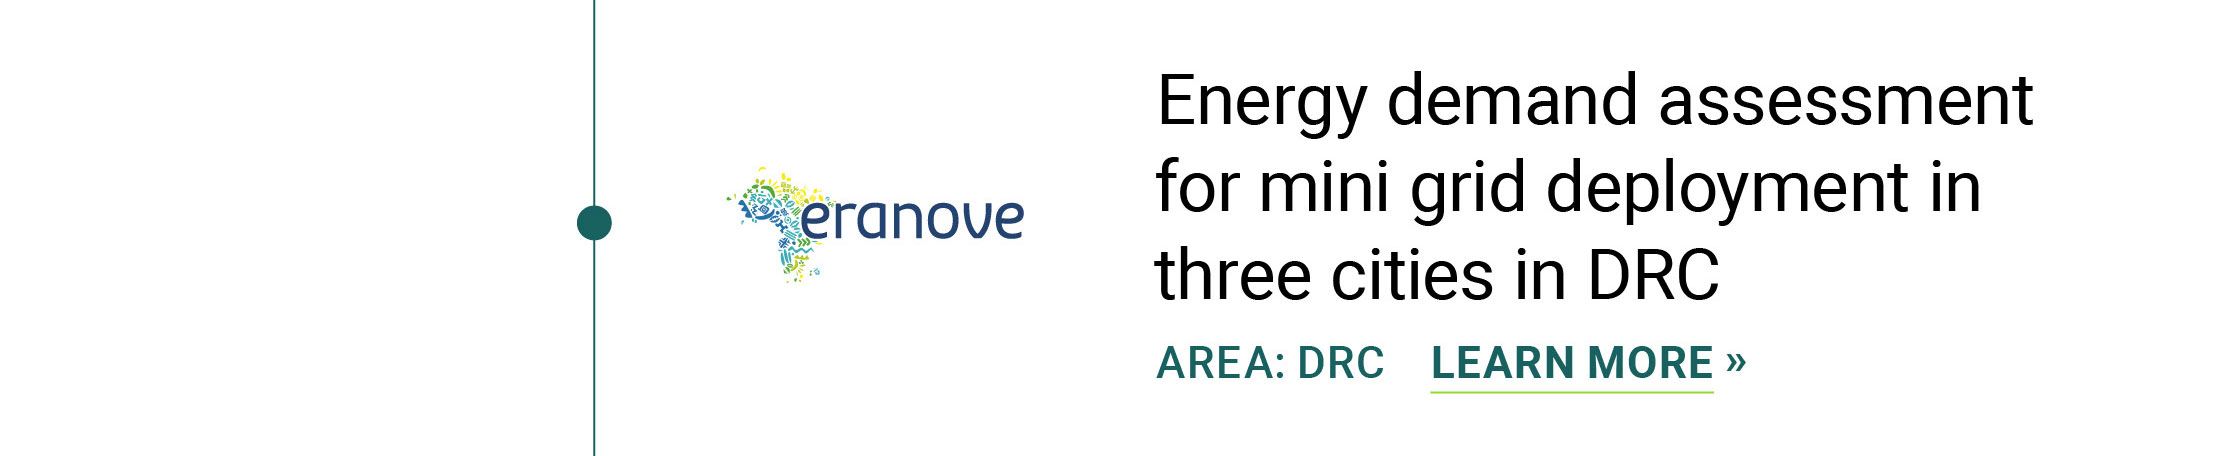 July 2019 Energy demand assessment for mini grid deployment in 3 cities in DRC Eranove DRC